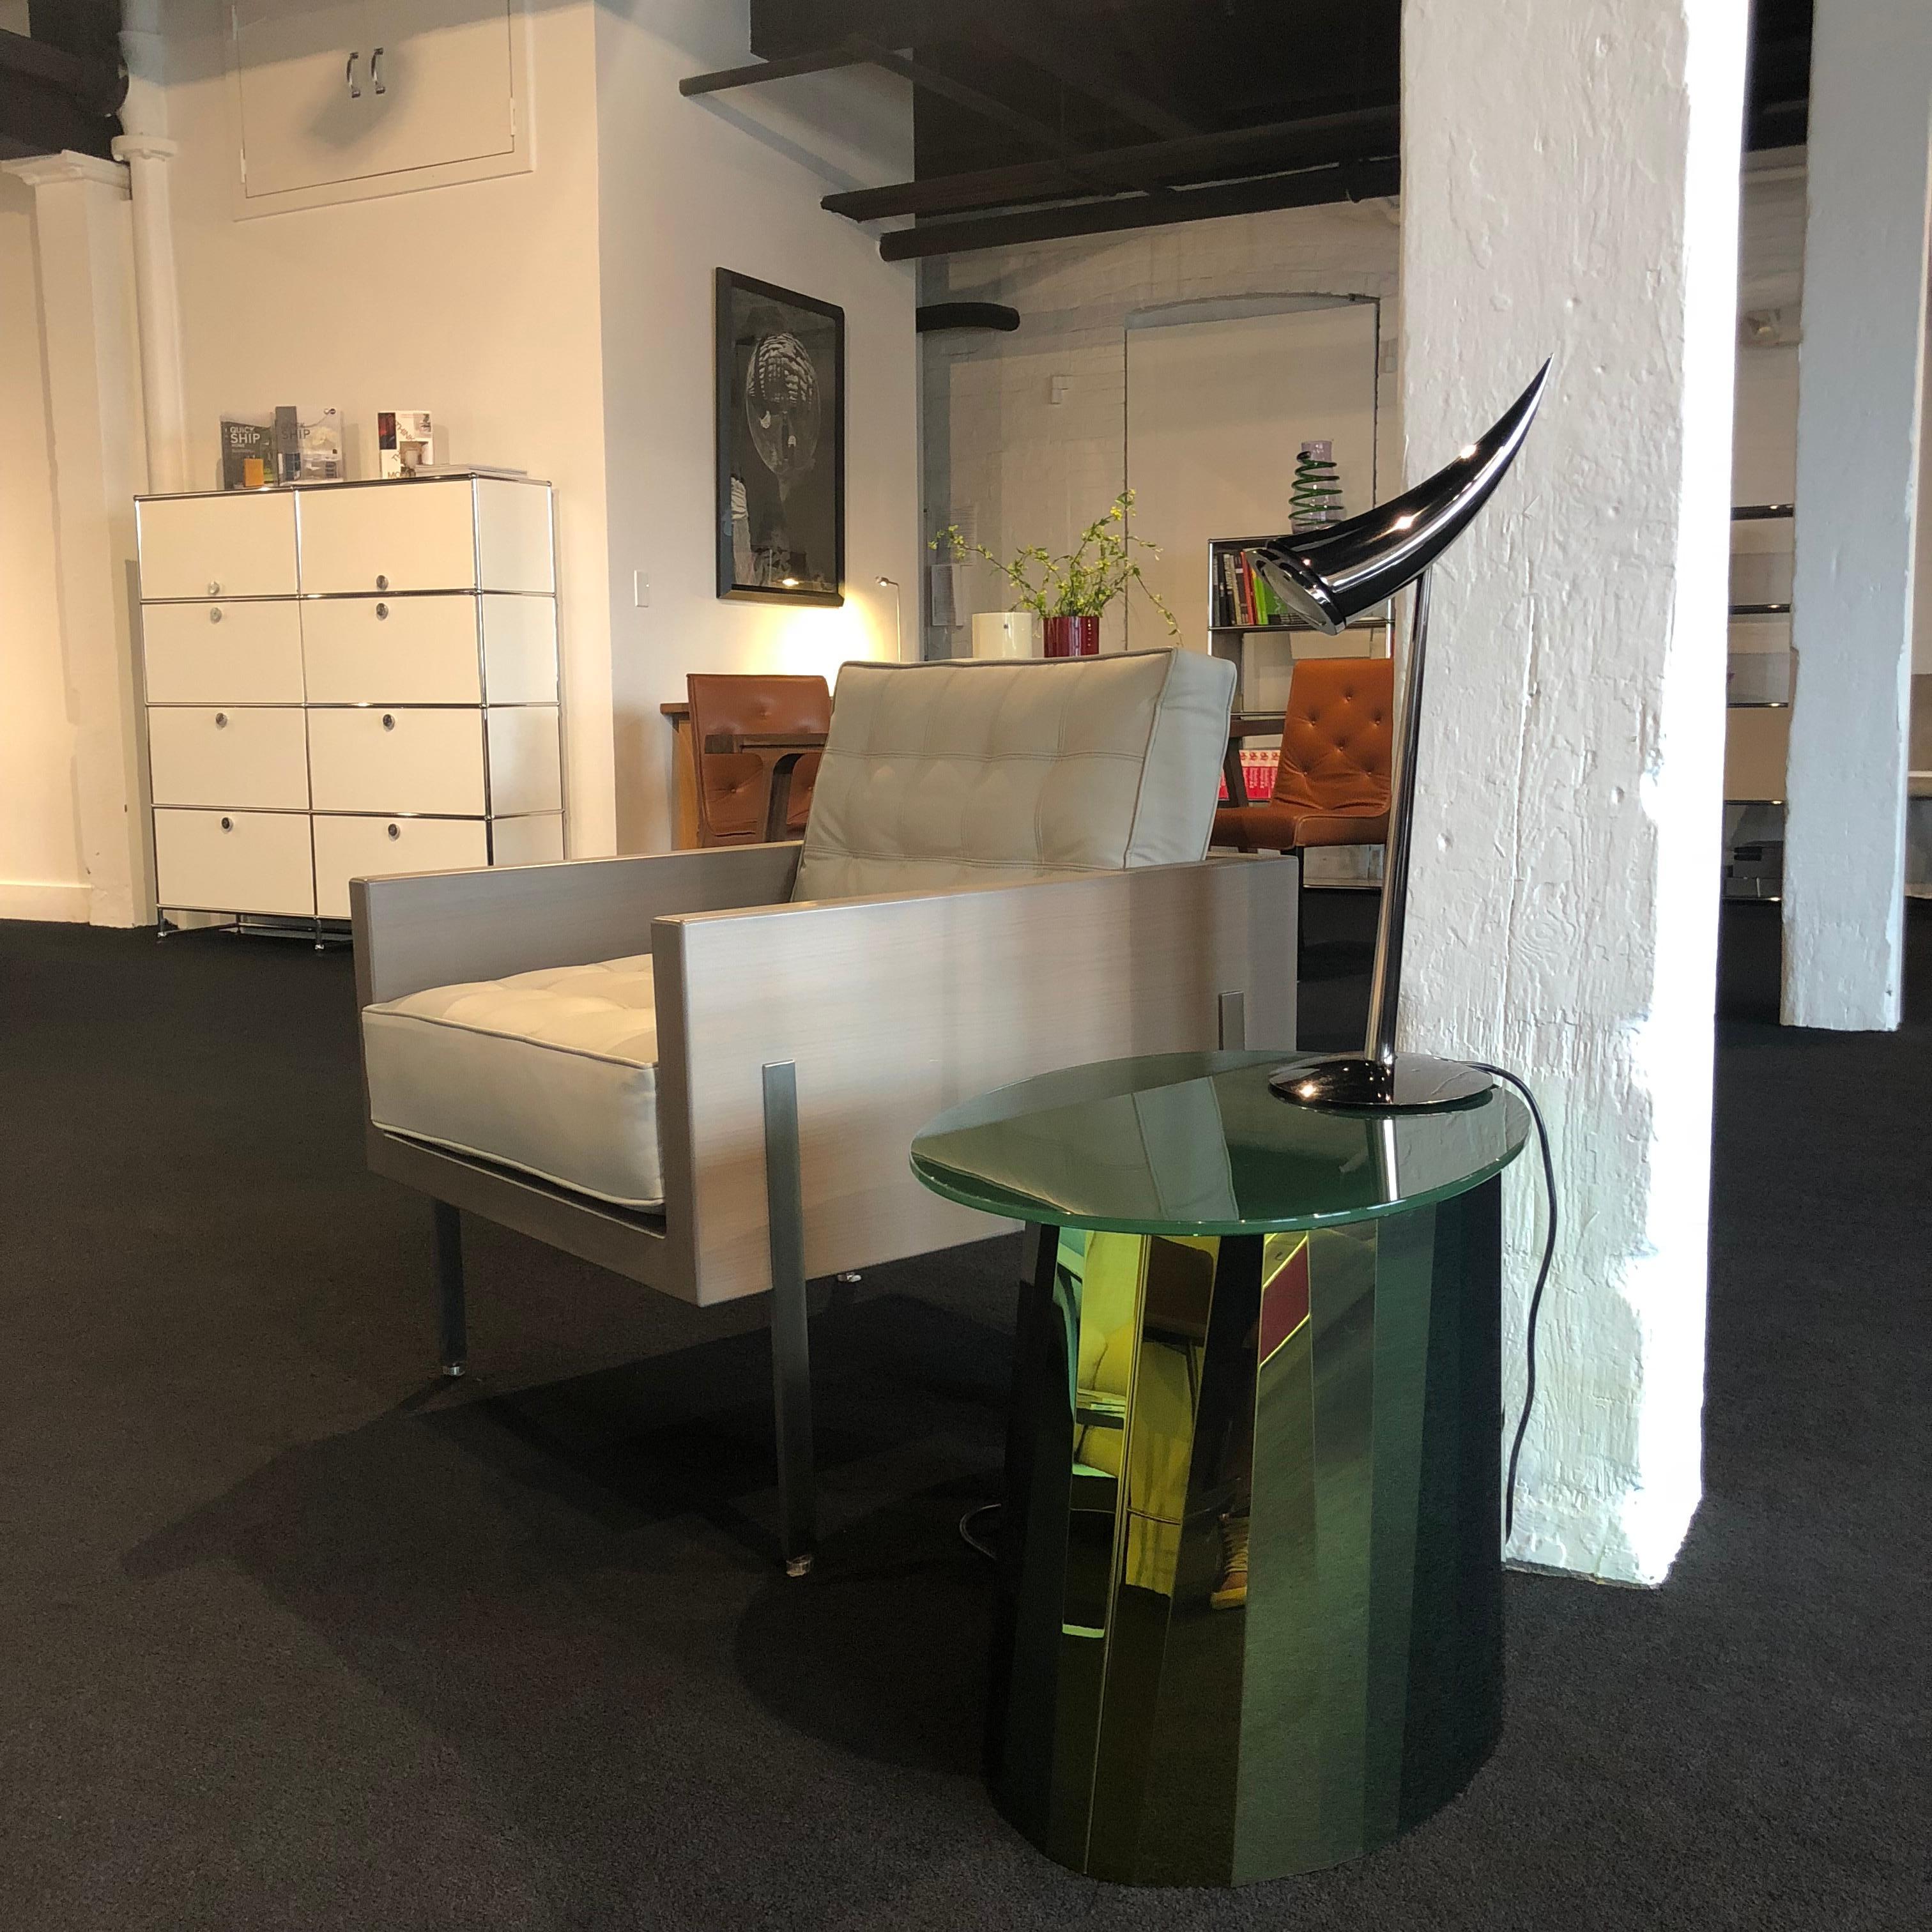 With the Pli side table French designer Victoria Wilmotte brings objects of unusual crystalline elegance and astonishing geometry to living environments. The bends and folds that gave Pli its name almost make the stainless steel base look like an